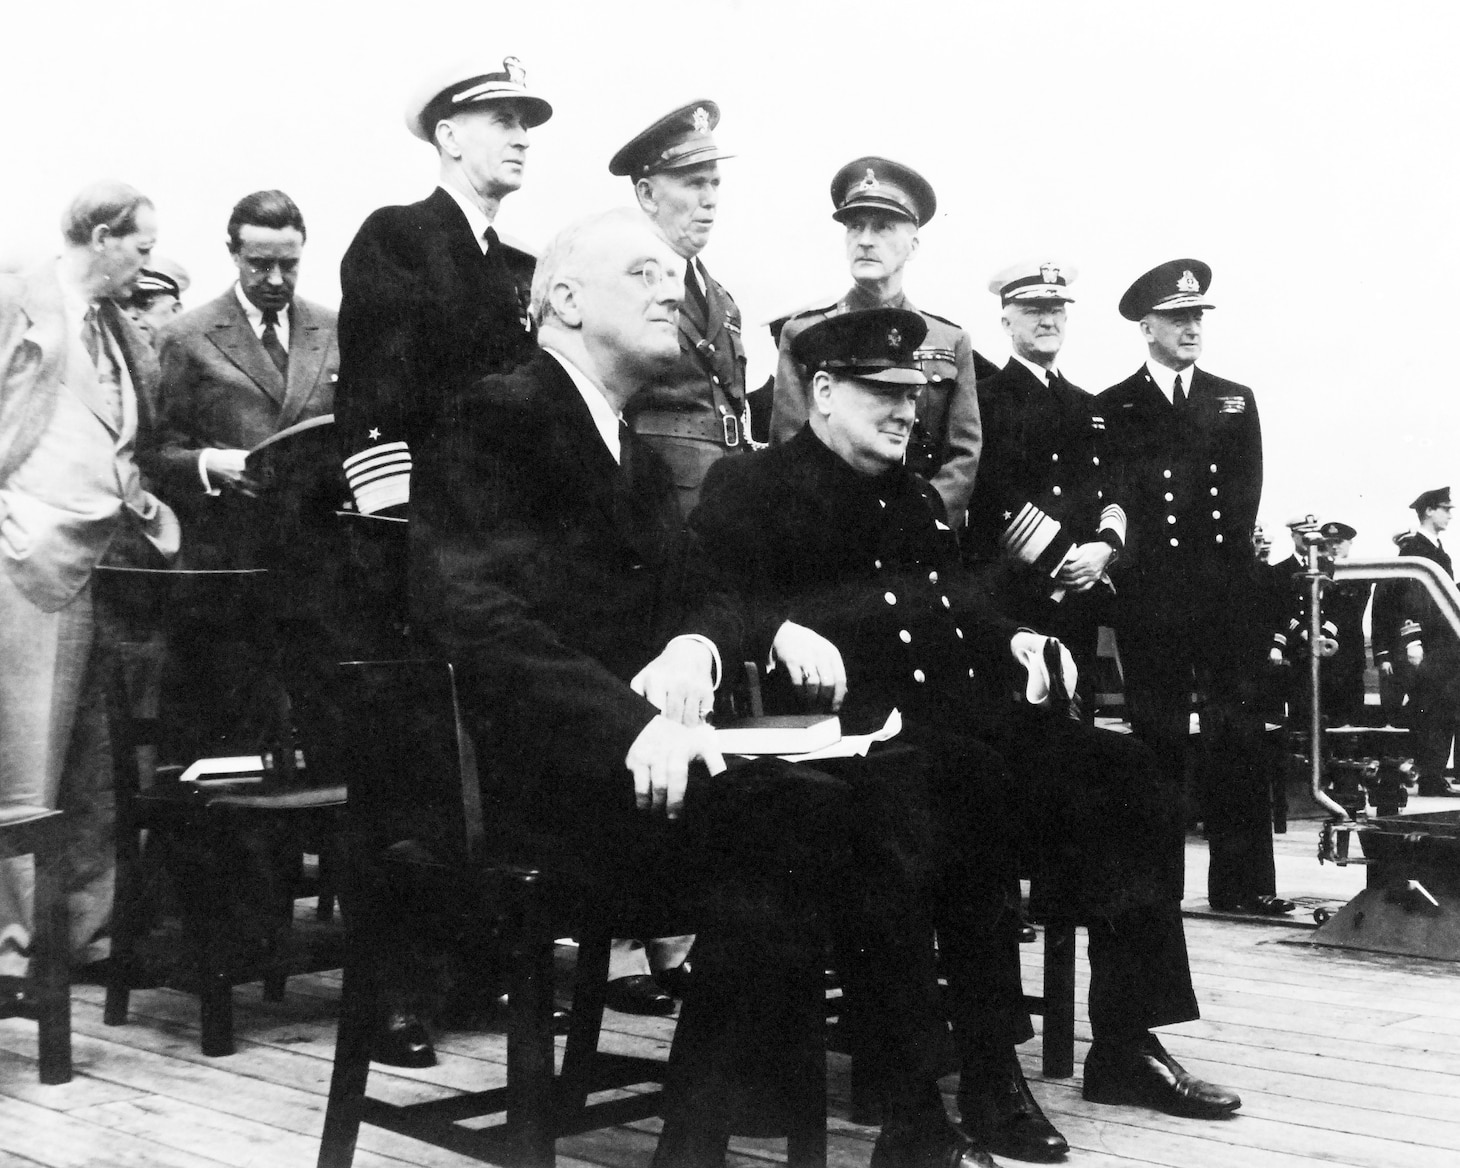 President Franklin Roosevelt and Prime Minister Winston Churchill aboard the Royal Navy battleship HMS Prince of Wales during the Atlantic Conference in August 1941. (Naval History and Heritage Command Photo)